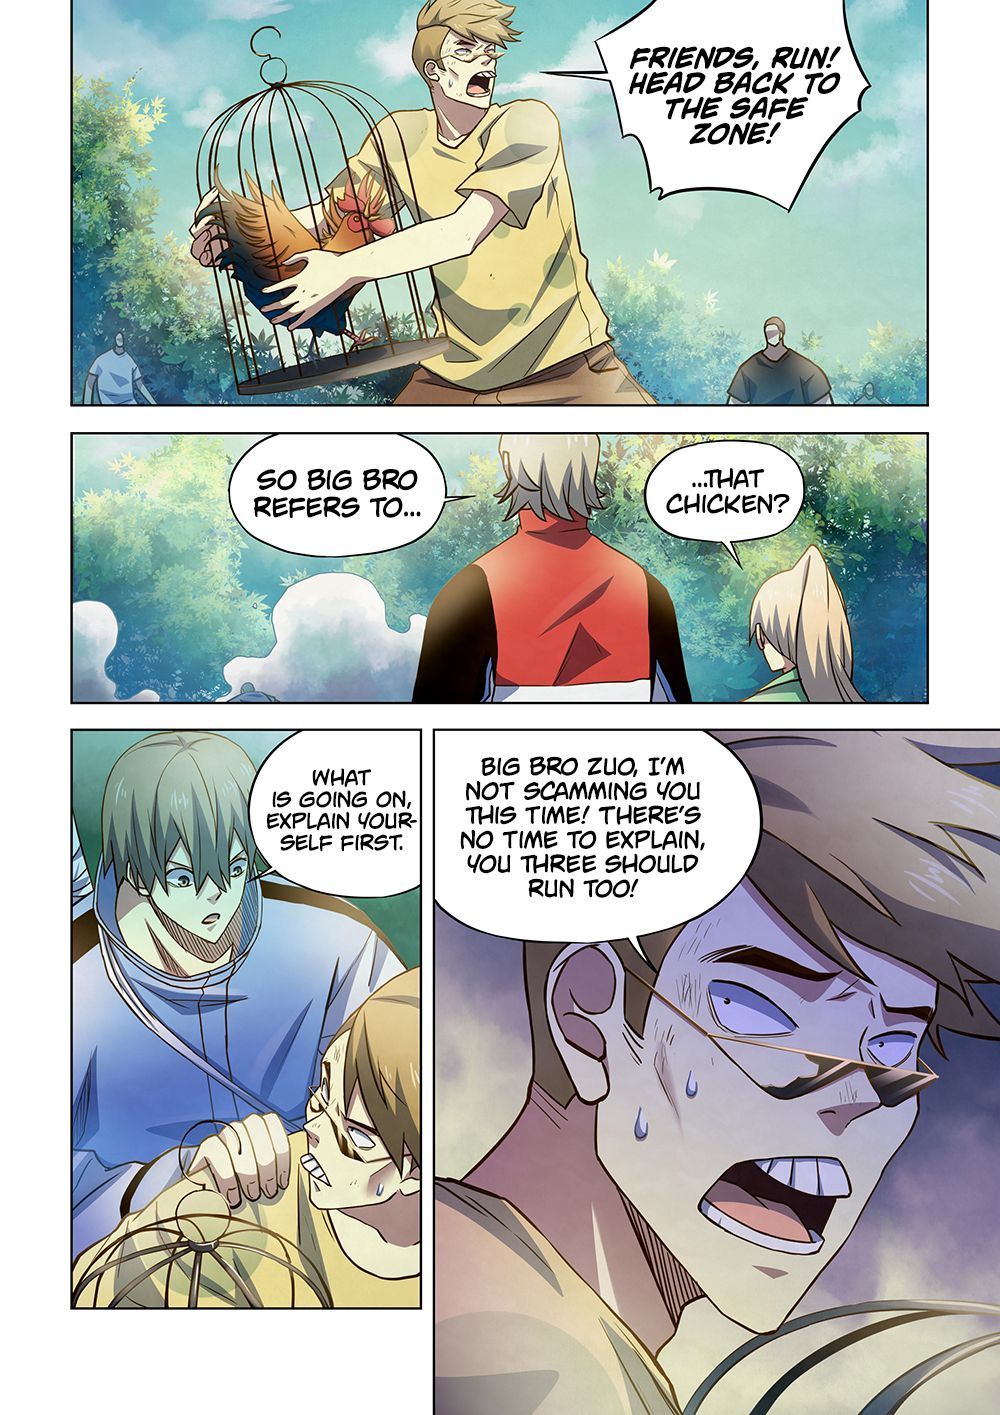 The Last Human Chapter 262 - Page 9